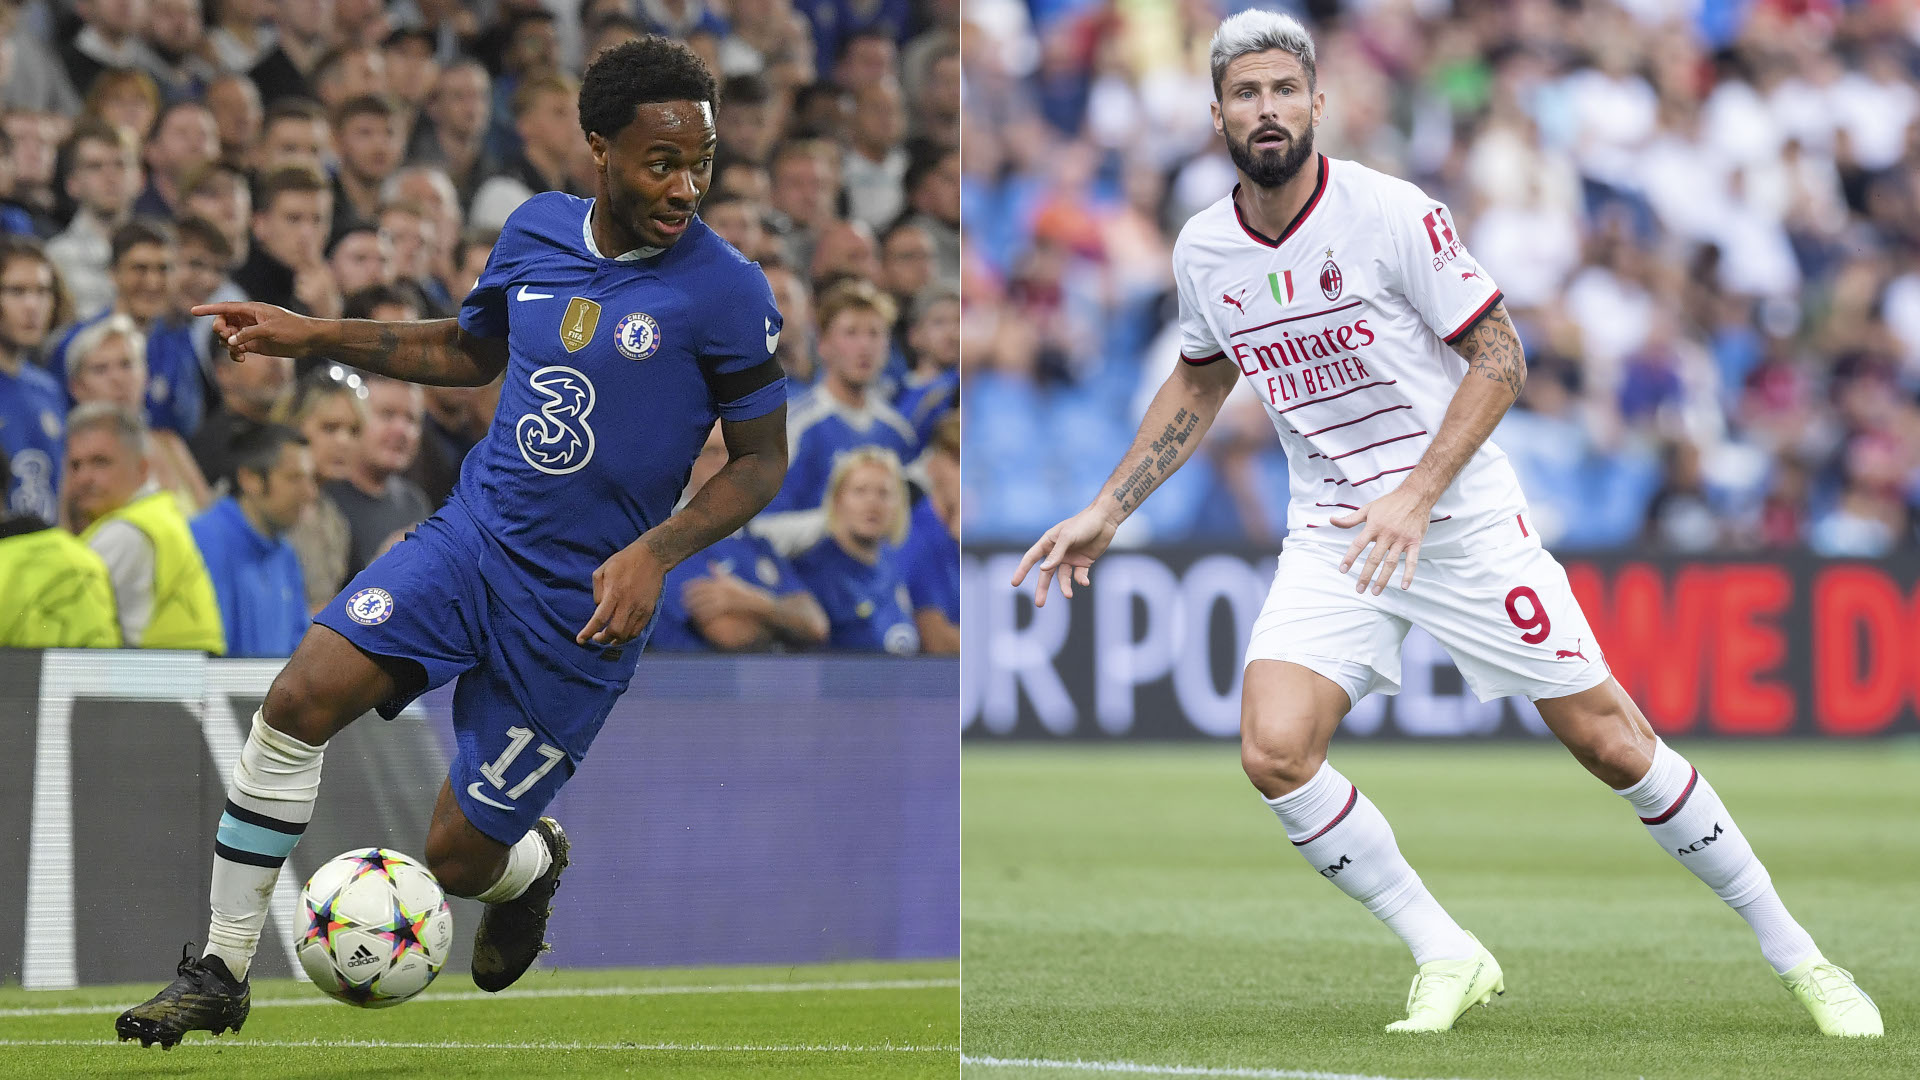 Chelsea vs AC Milan live stream how to watch Champions League online and on TV from anywhere, team news TechRadar